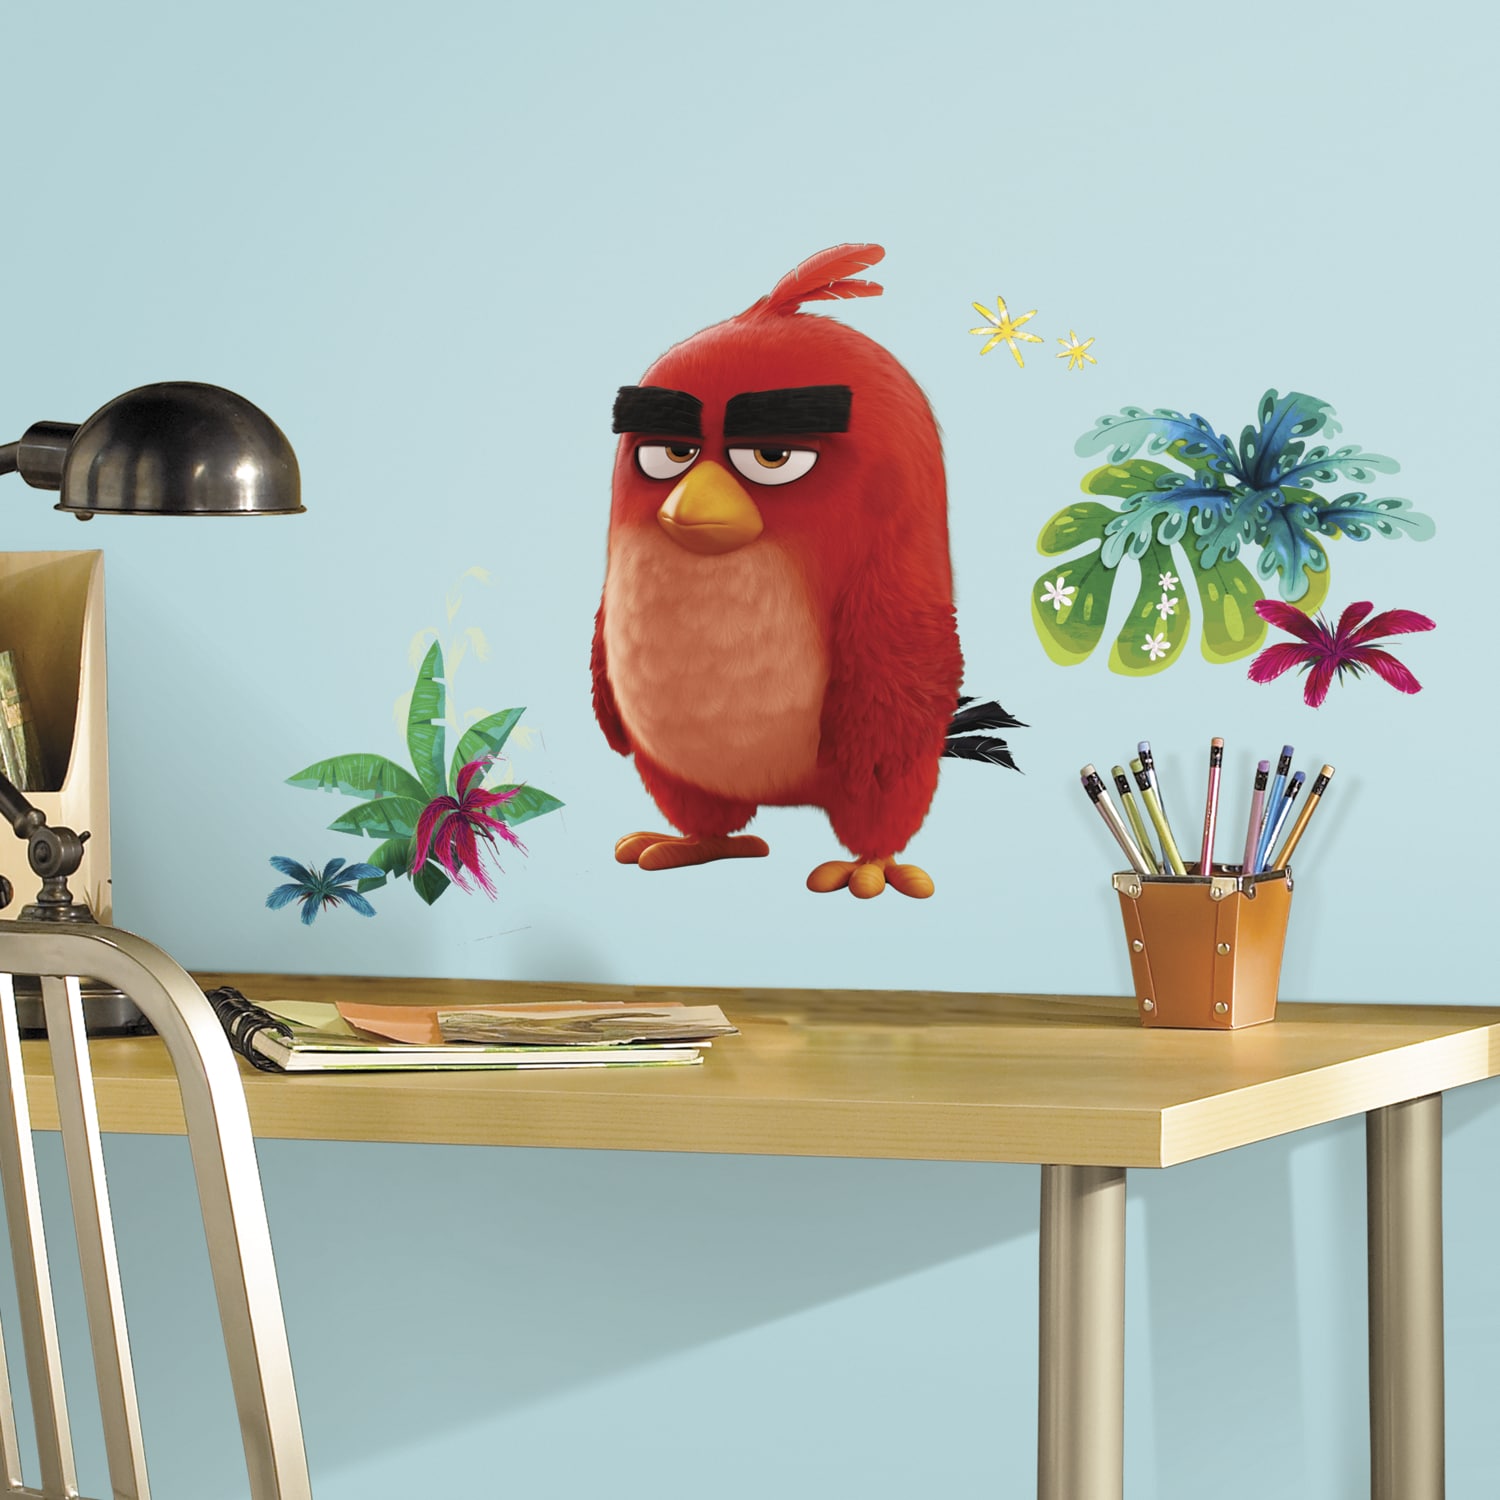 Ideal to Match Angry Birds Wall Decals & Angry Birds Duvet Covers. Lampshades 